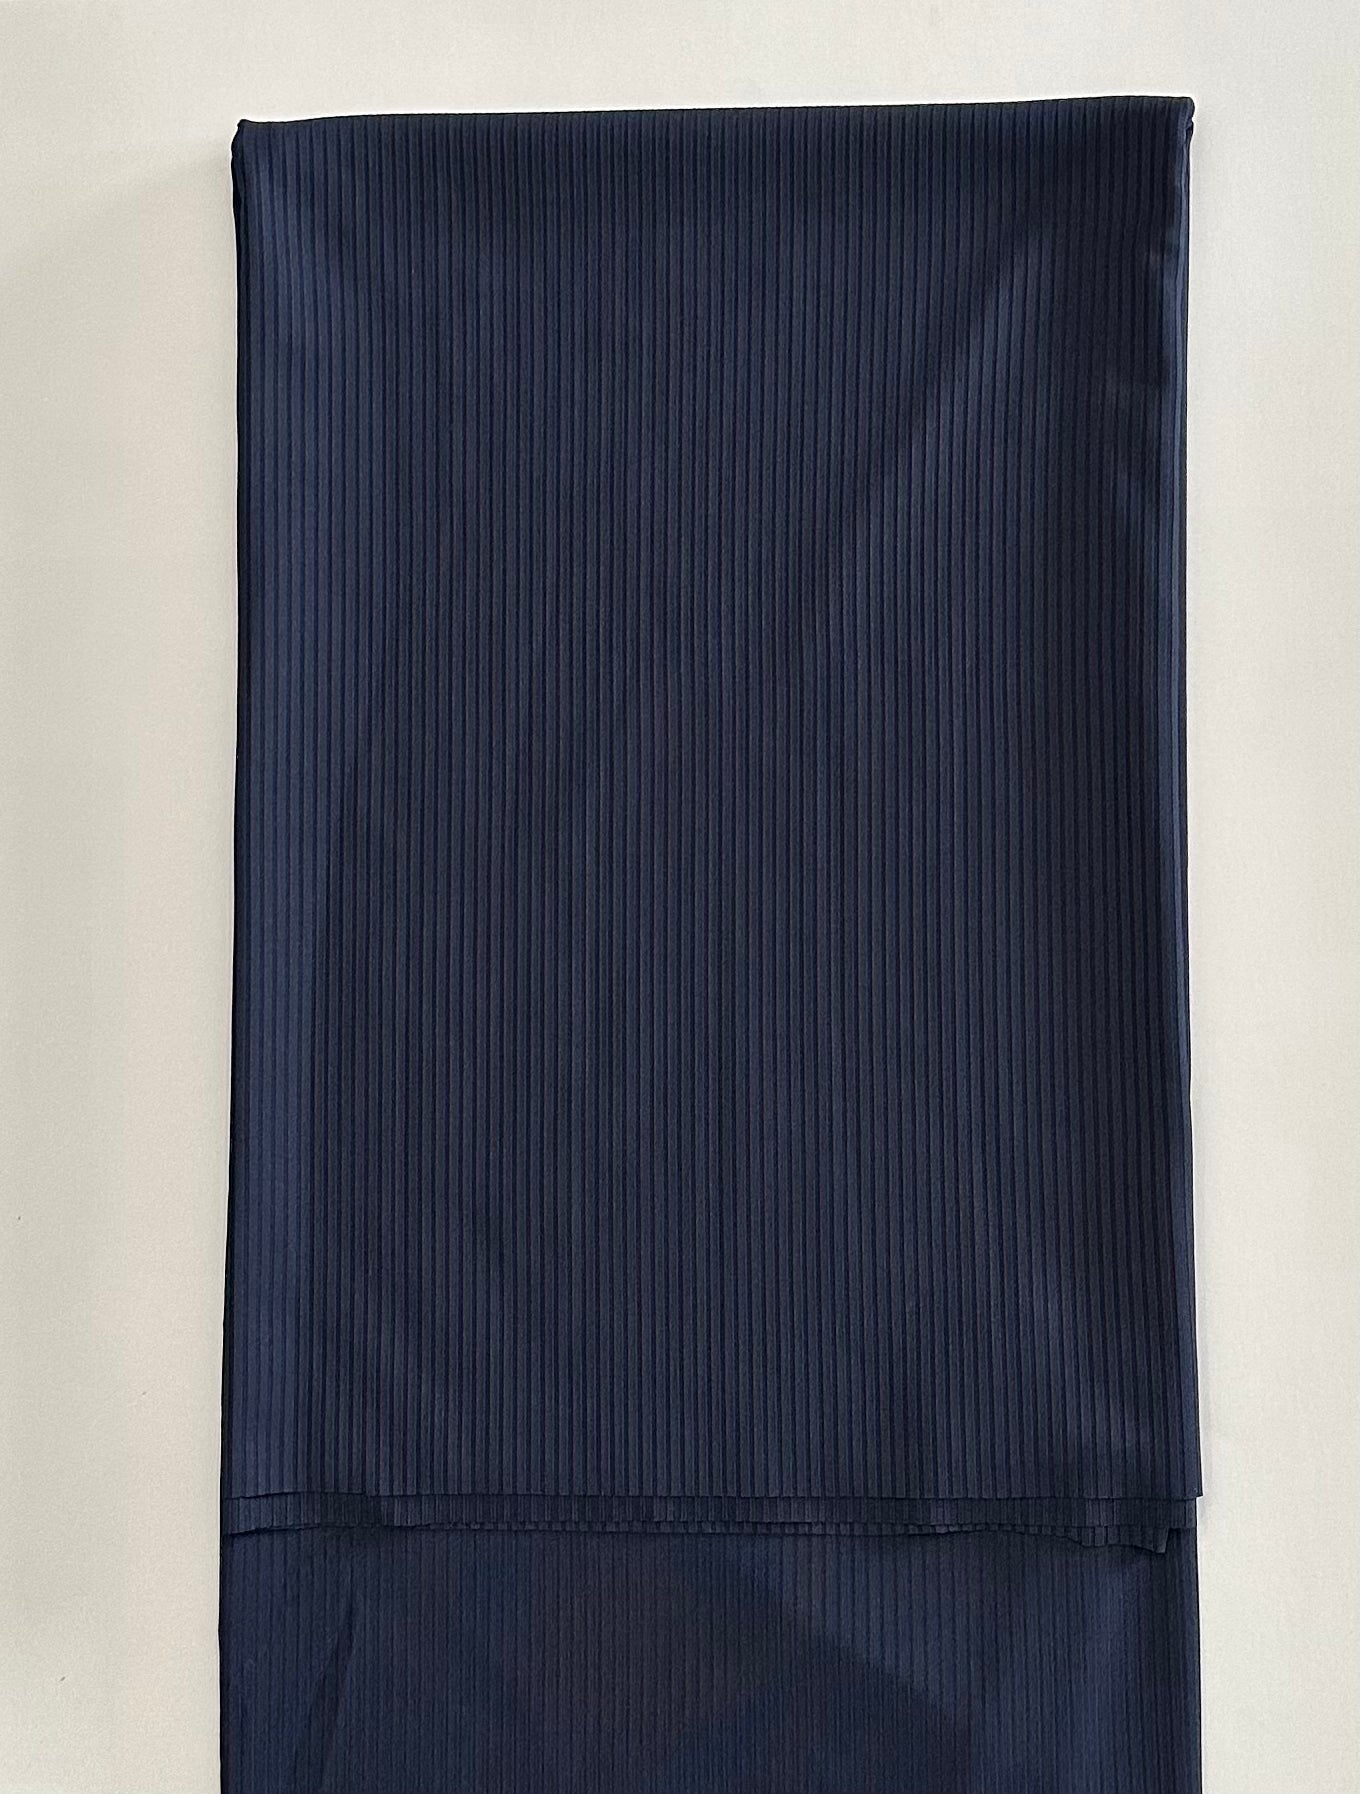 Solid Navy on Unbrushed Rib Knit Fabric Sold by the 1/4 yard